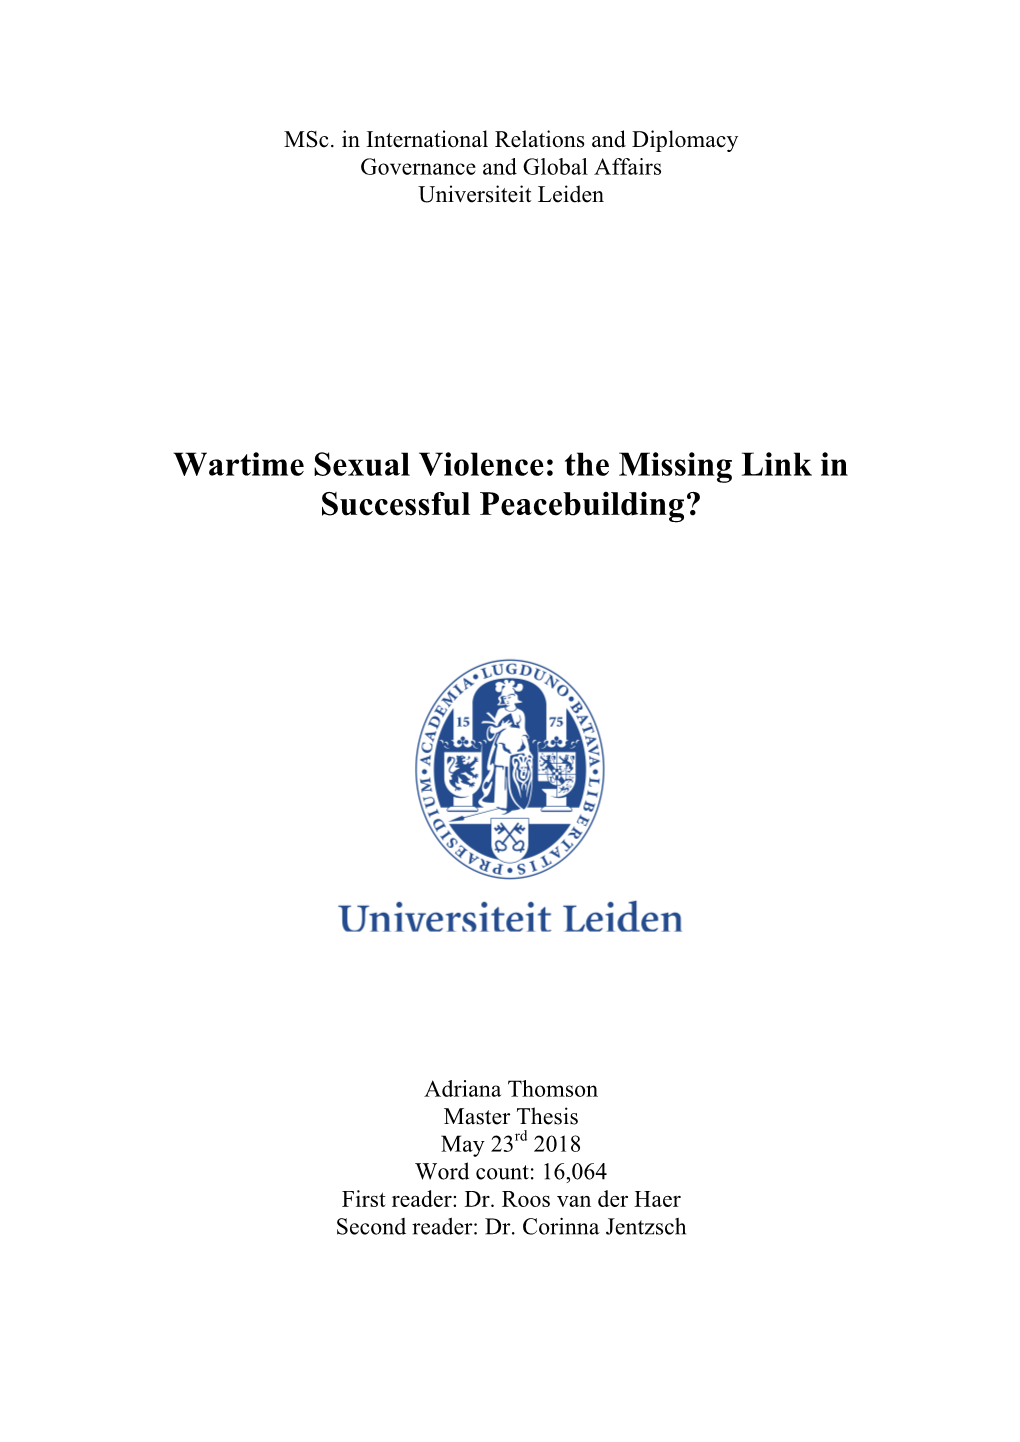 Wartime Sexual Violence: the Missing Link in Successful Peacebuilding?